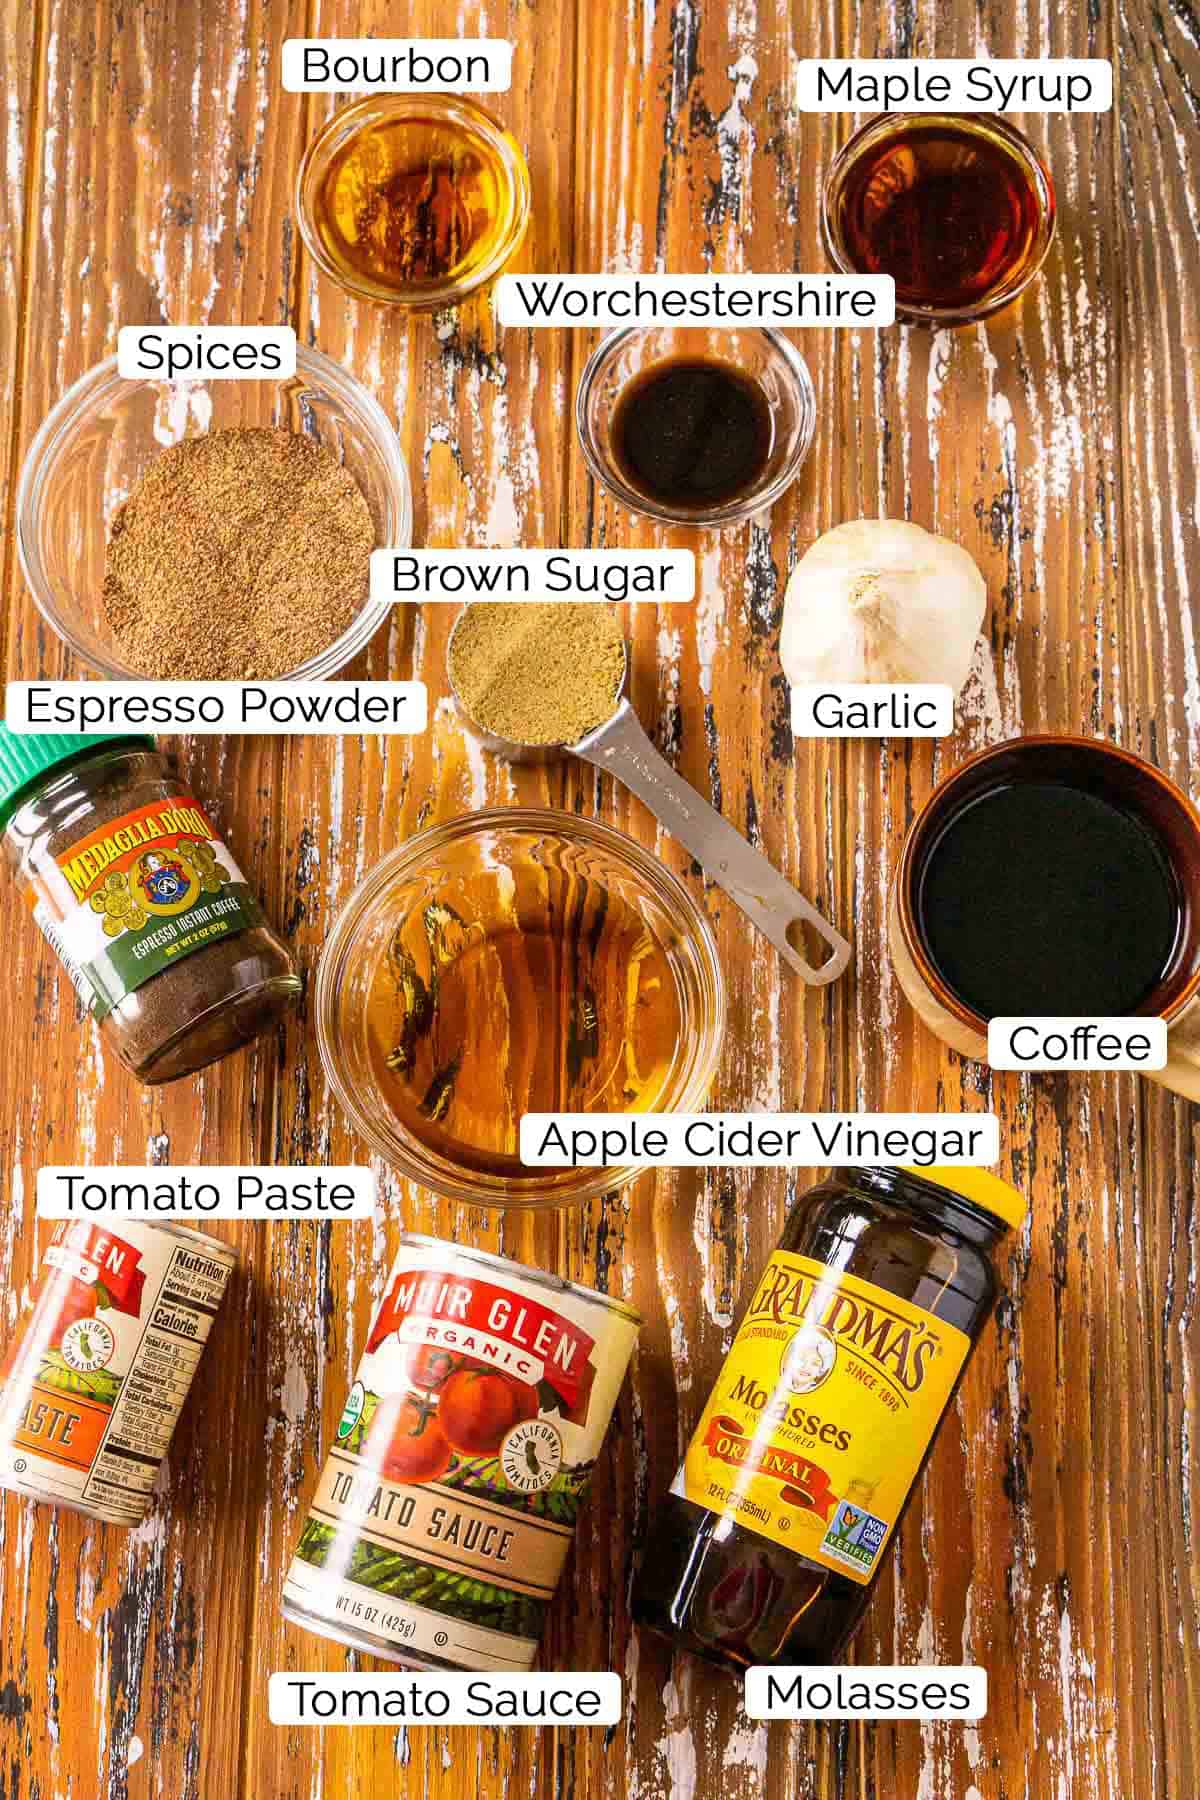 The ingredients for the sauce with black and white labels on a wooden board.